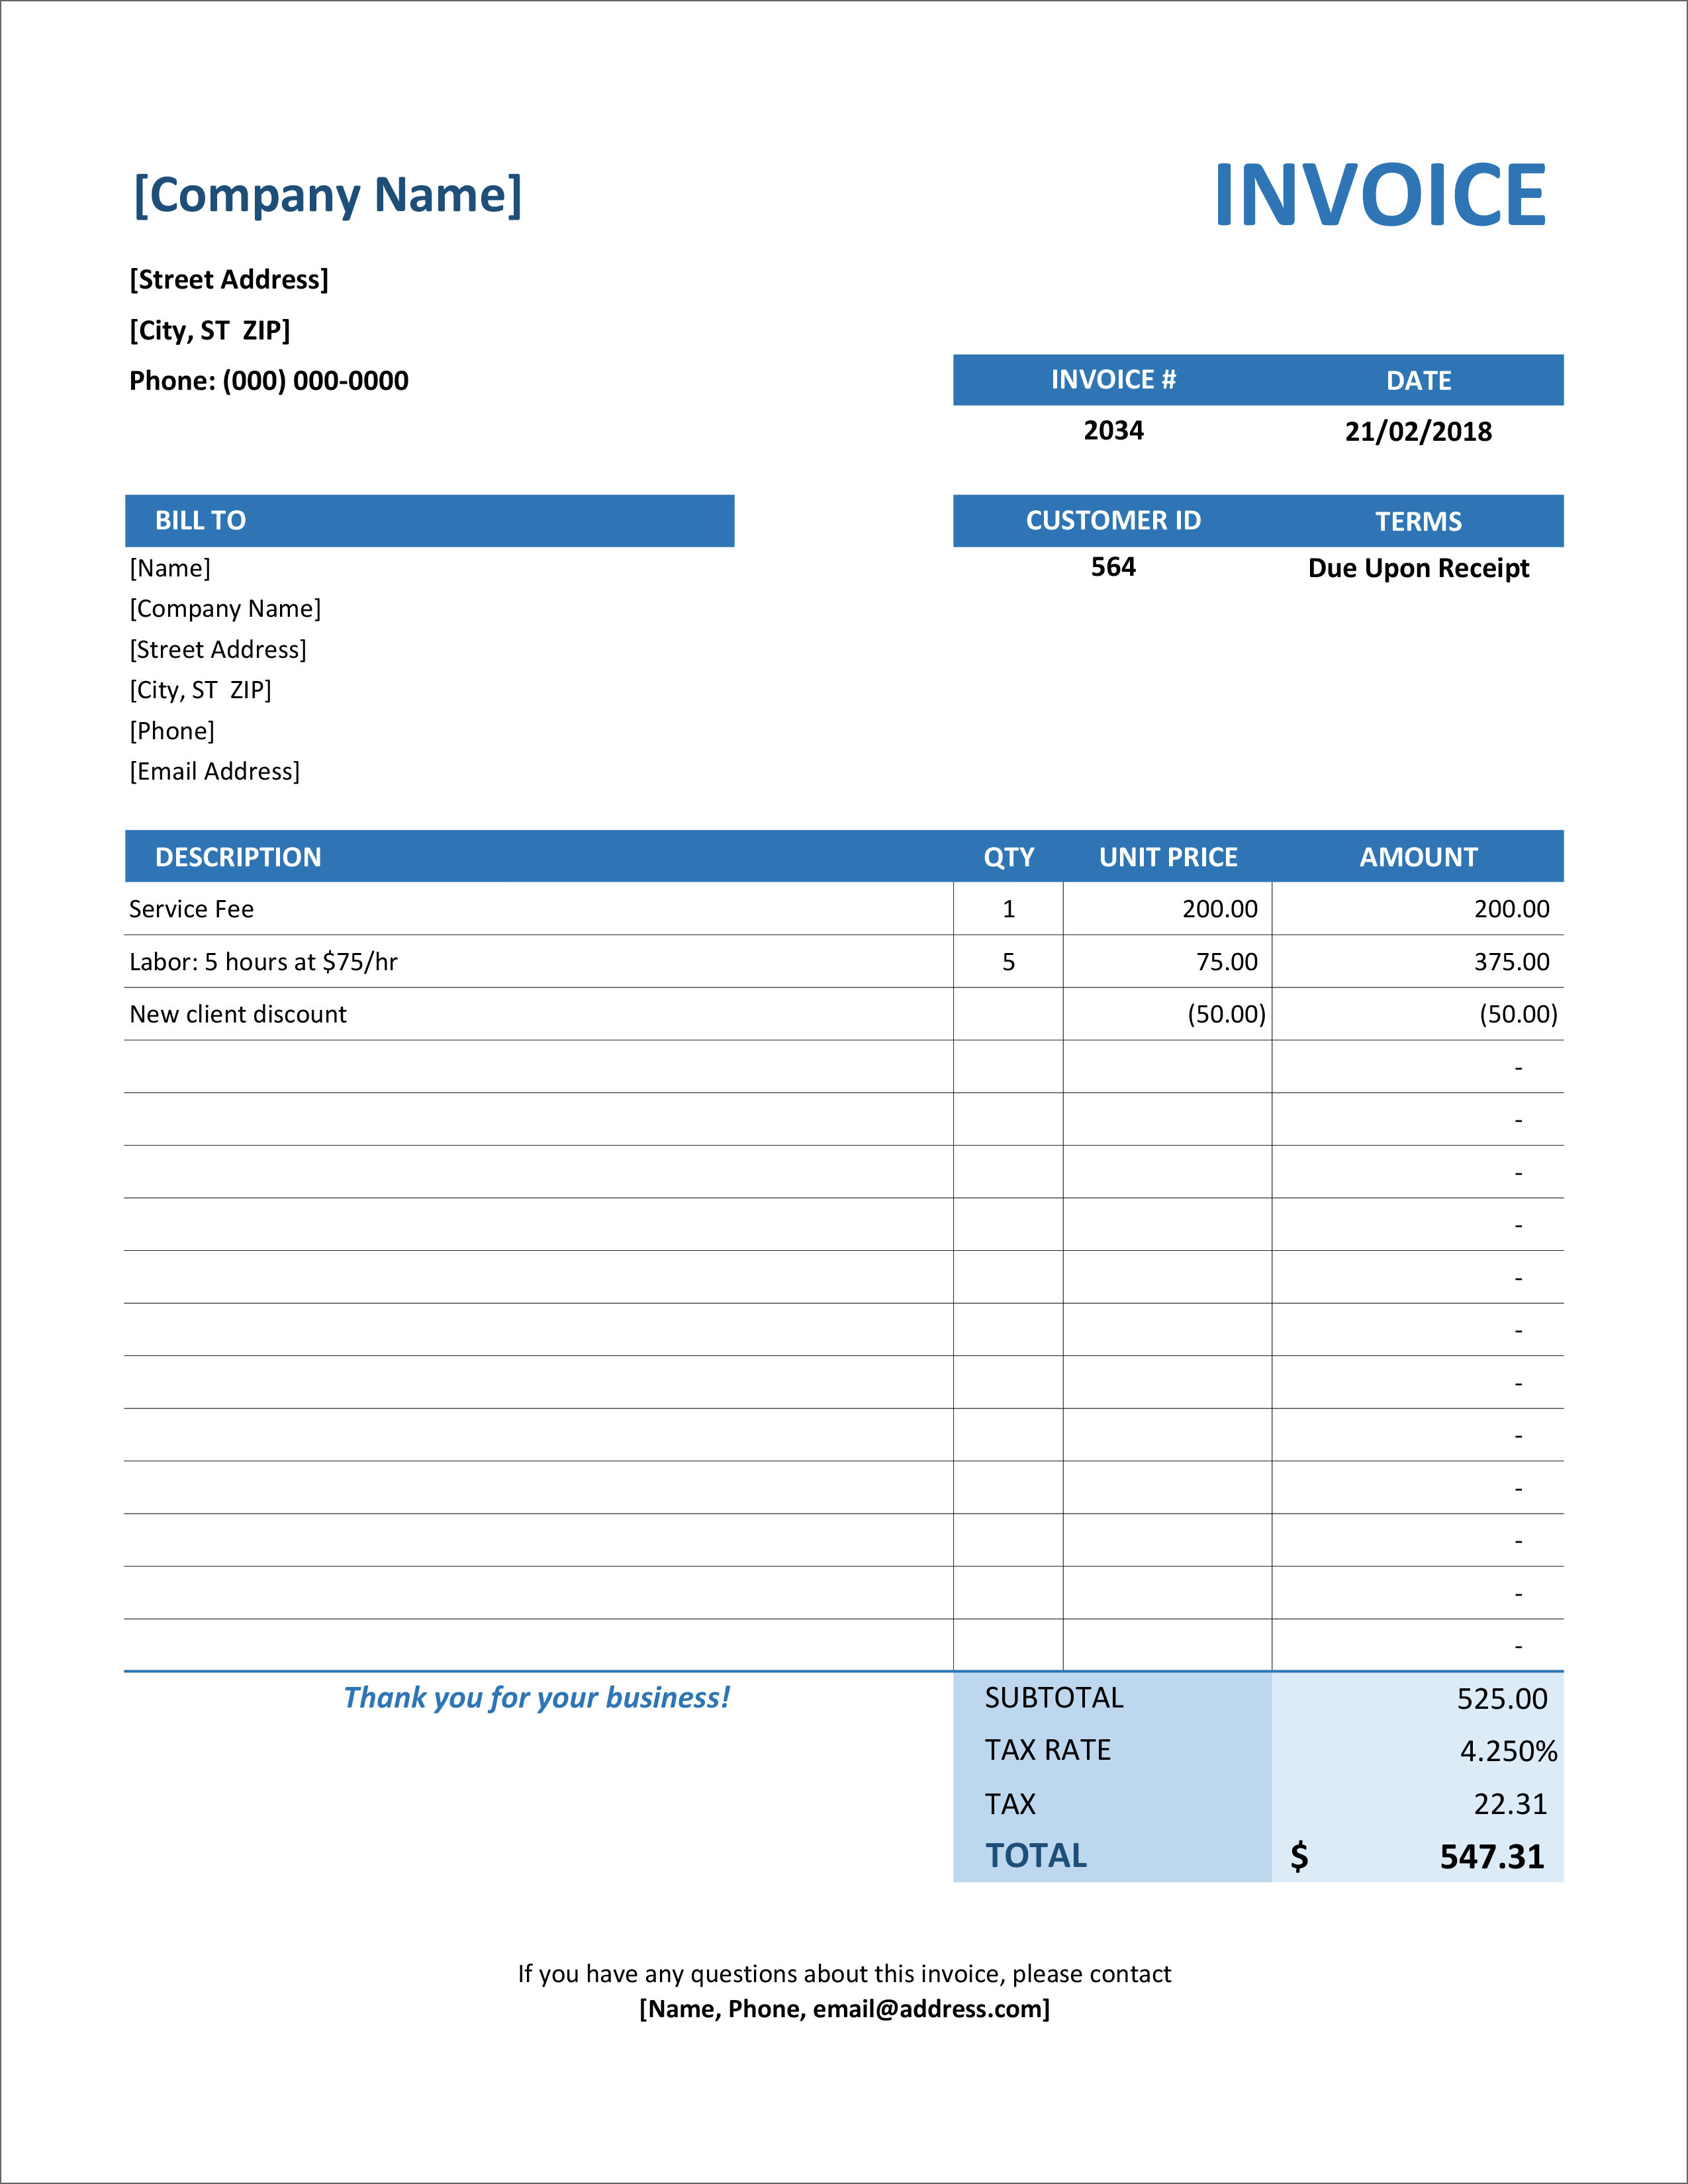 generating-invoices-in-excel-excel-templates-askxz